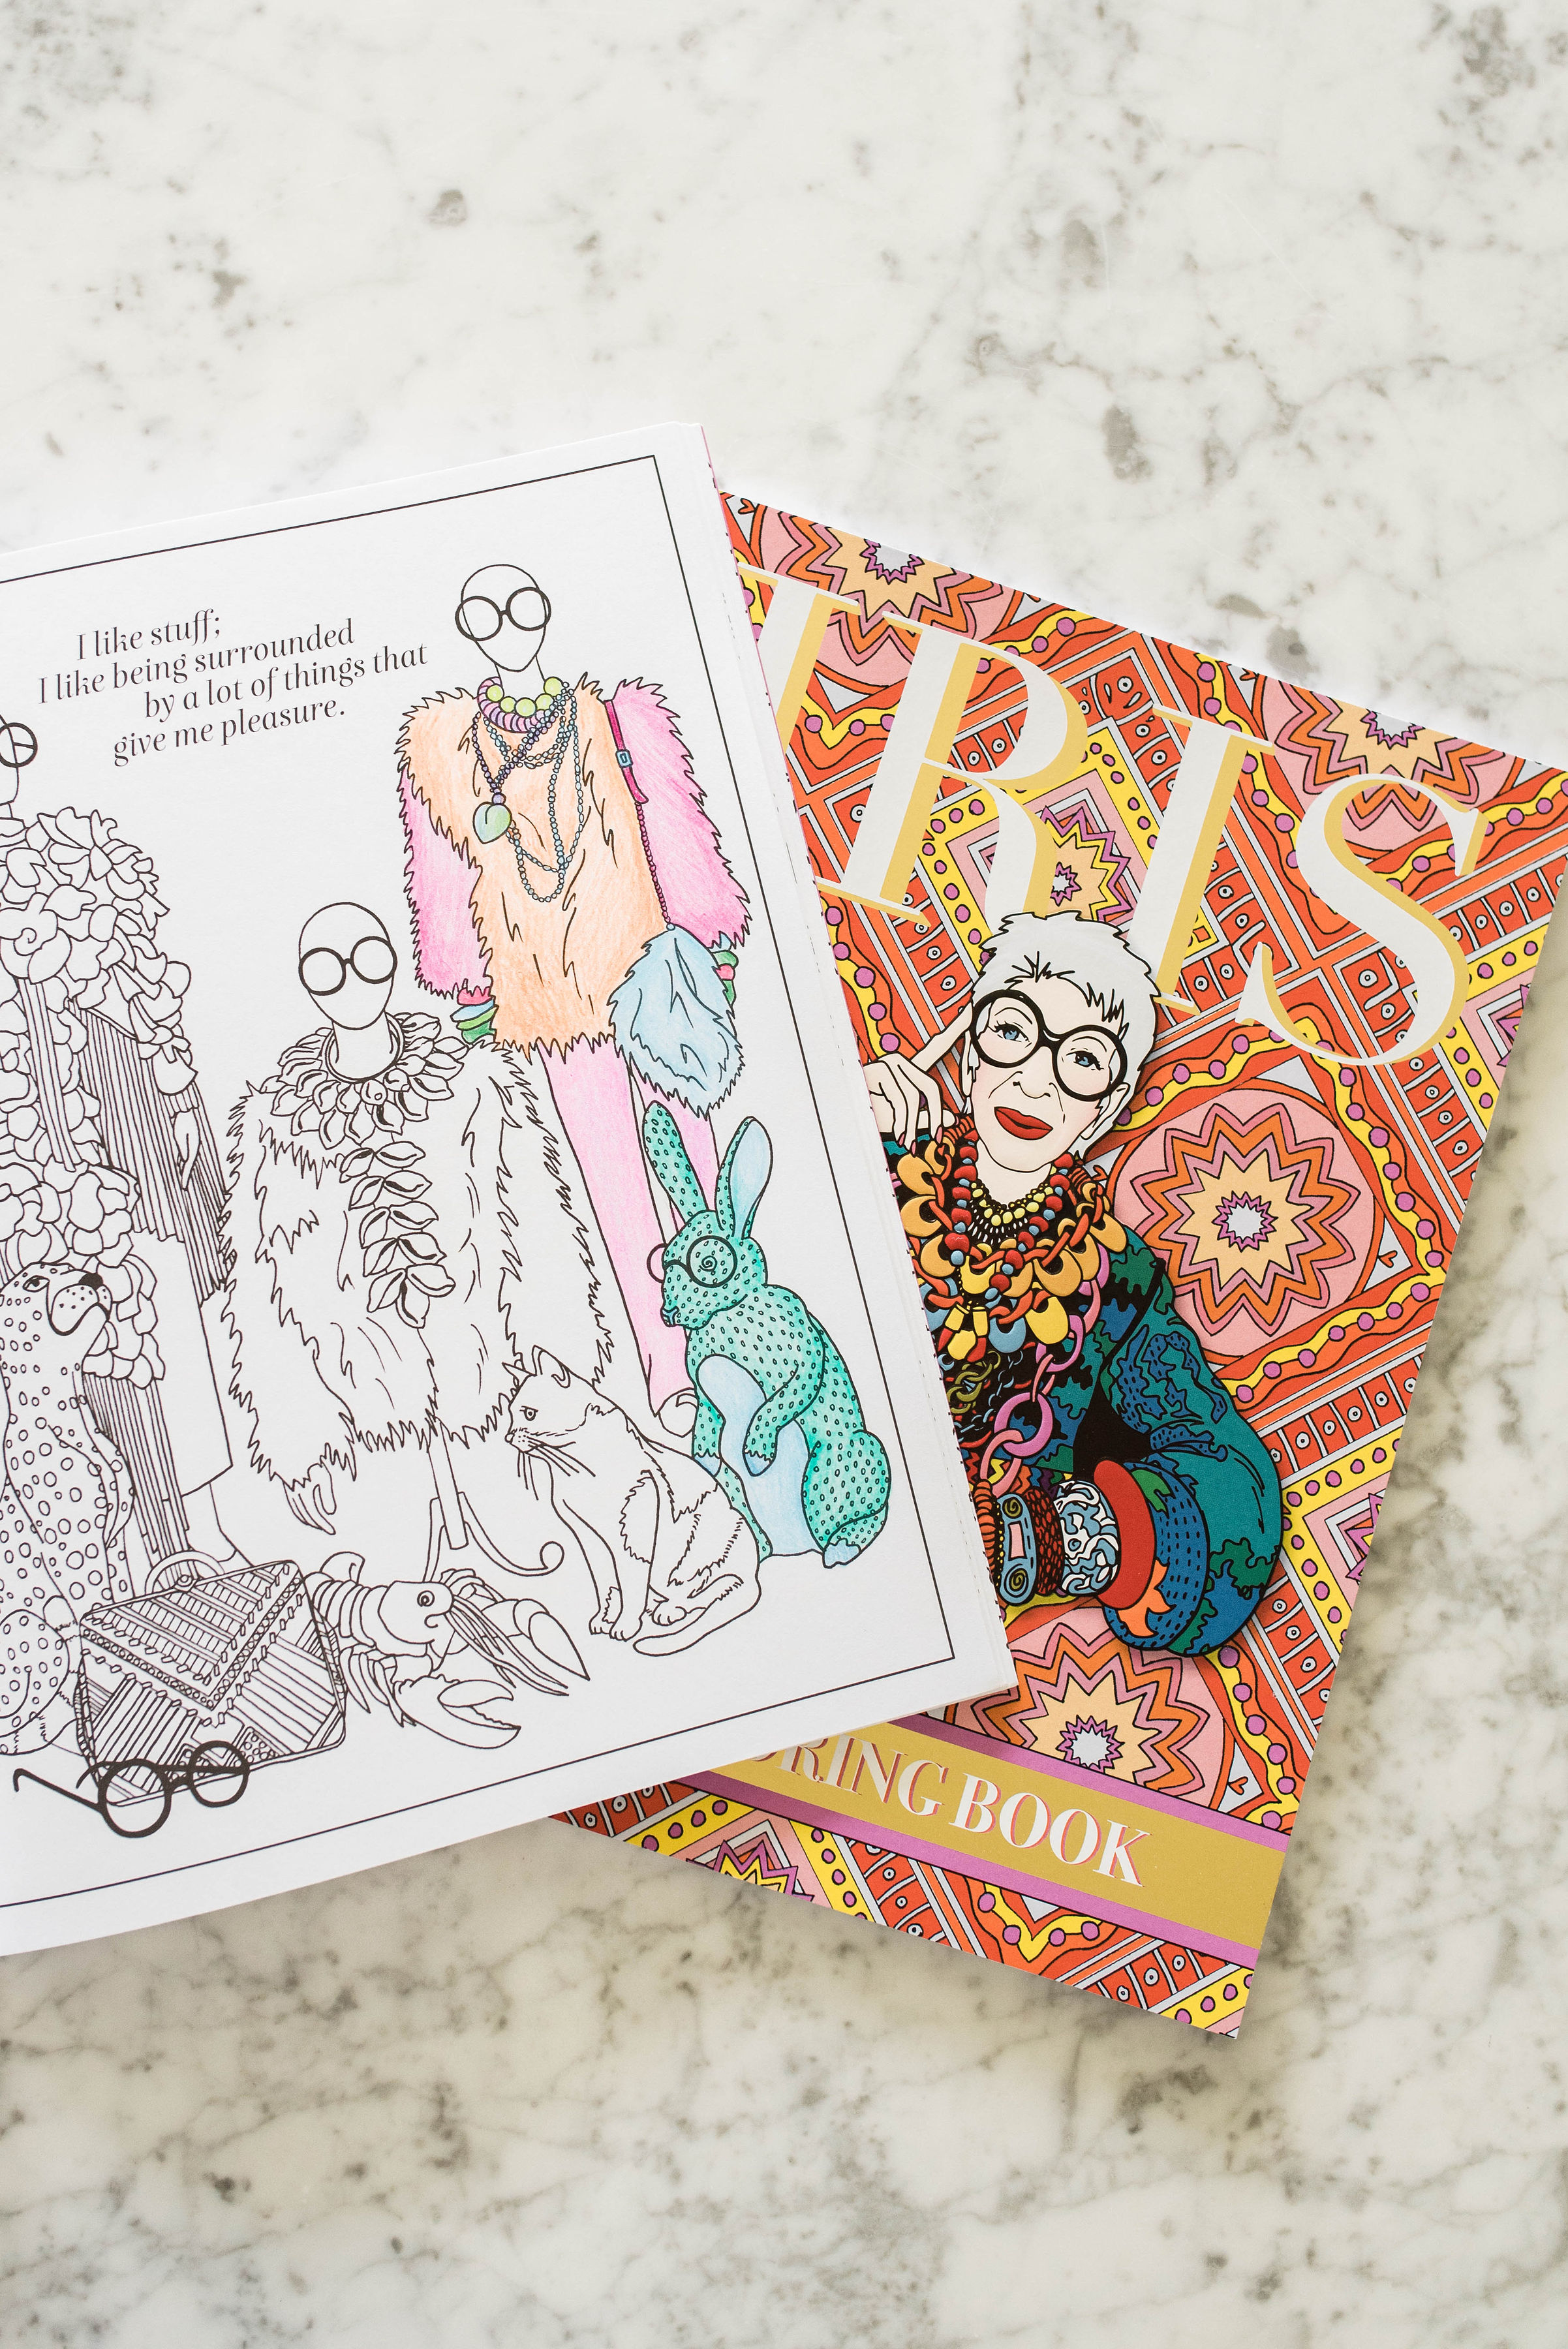 Cover and interior page of coloring book featuring Iris Apfel